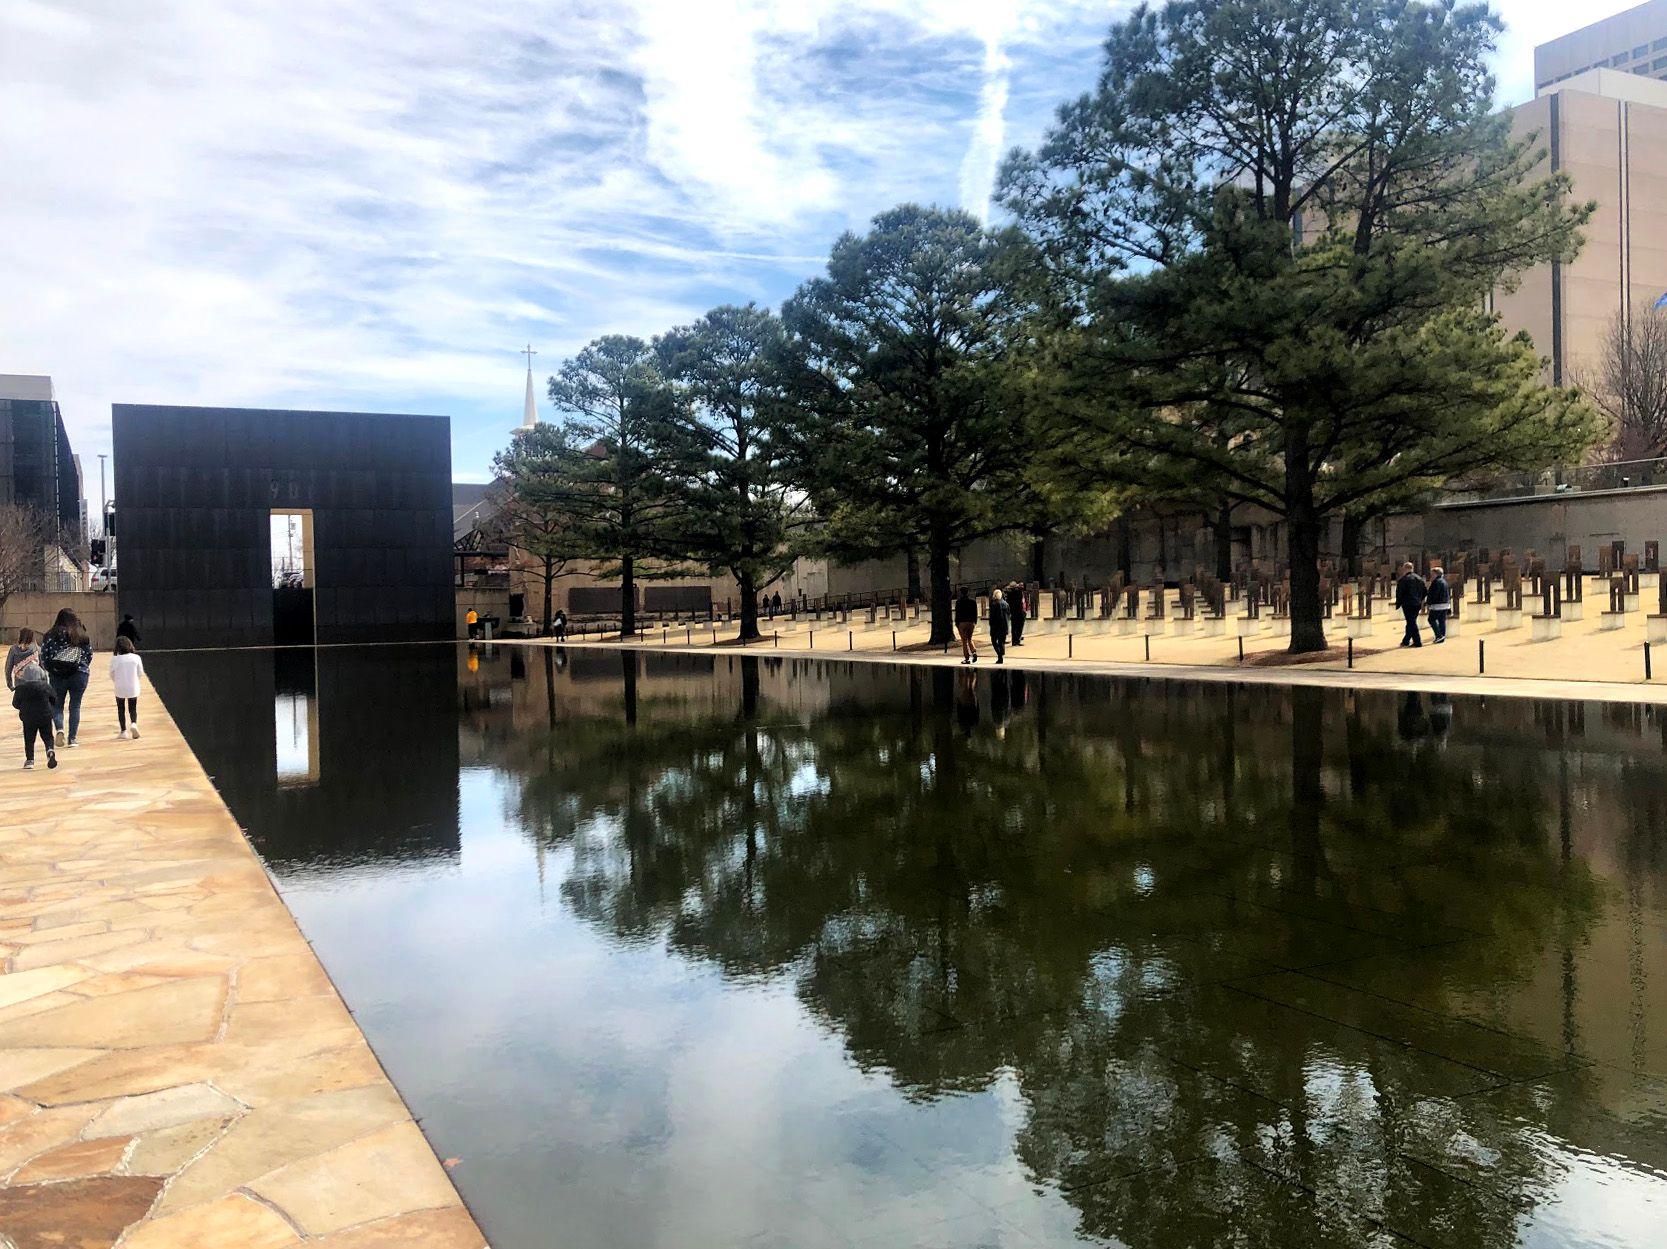 The National Memorial of the Oklahoma City Bombing. A black retangular arch reflect into a pool or water.